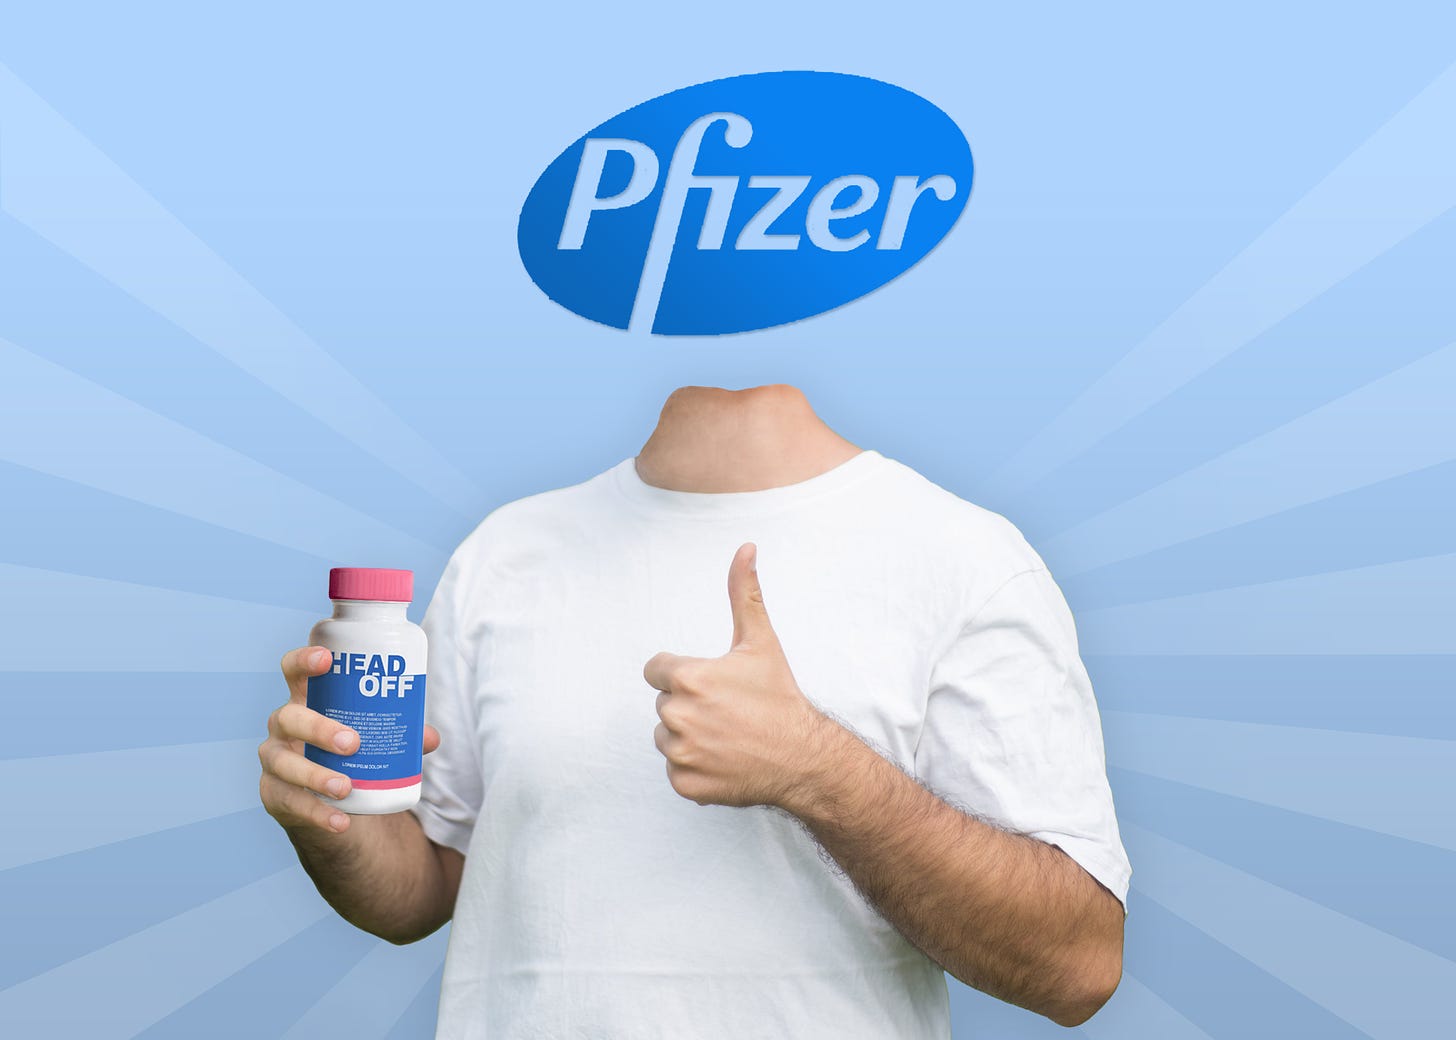 Pfizer new medication for headaches